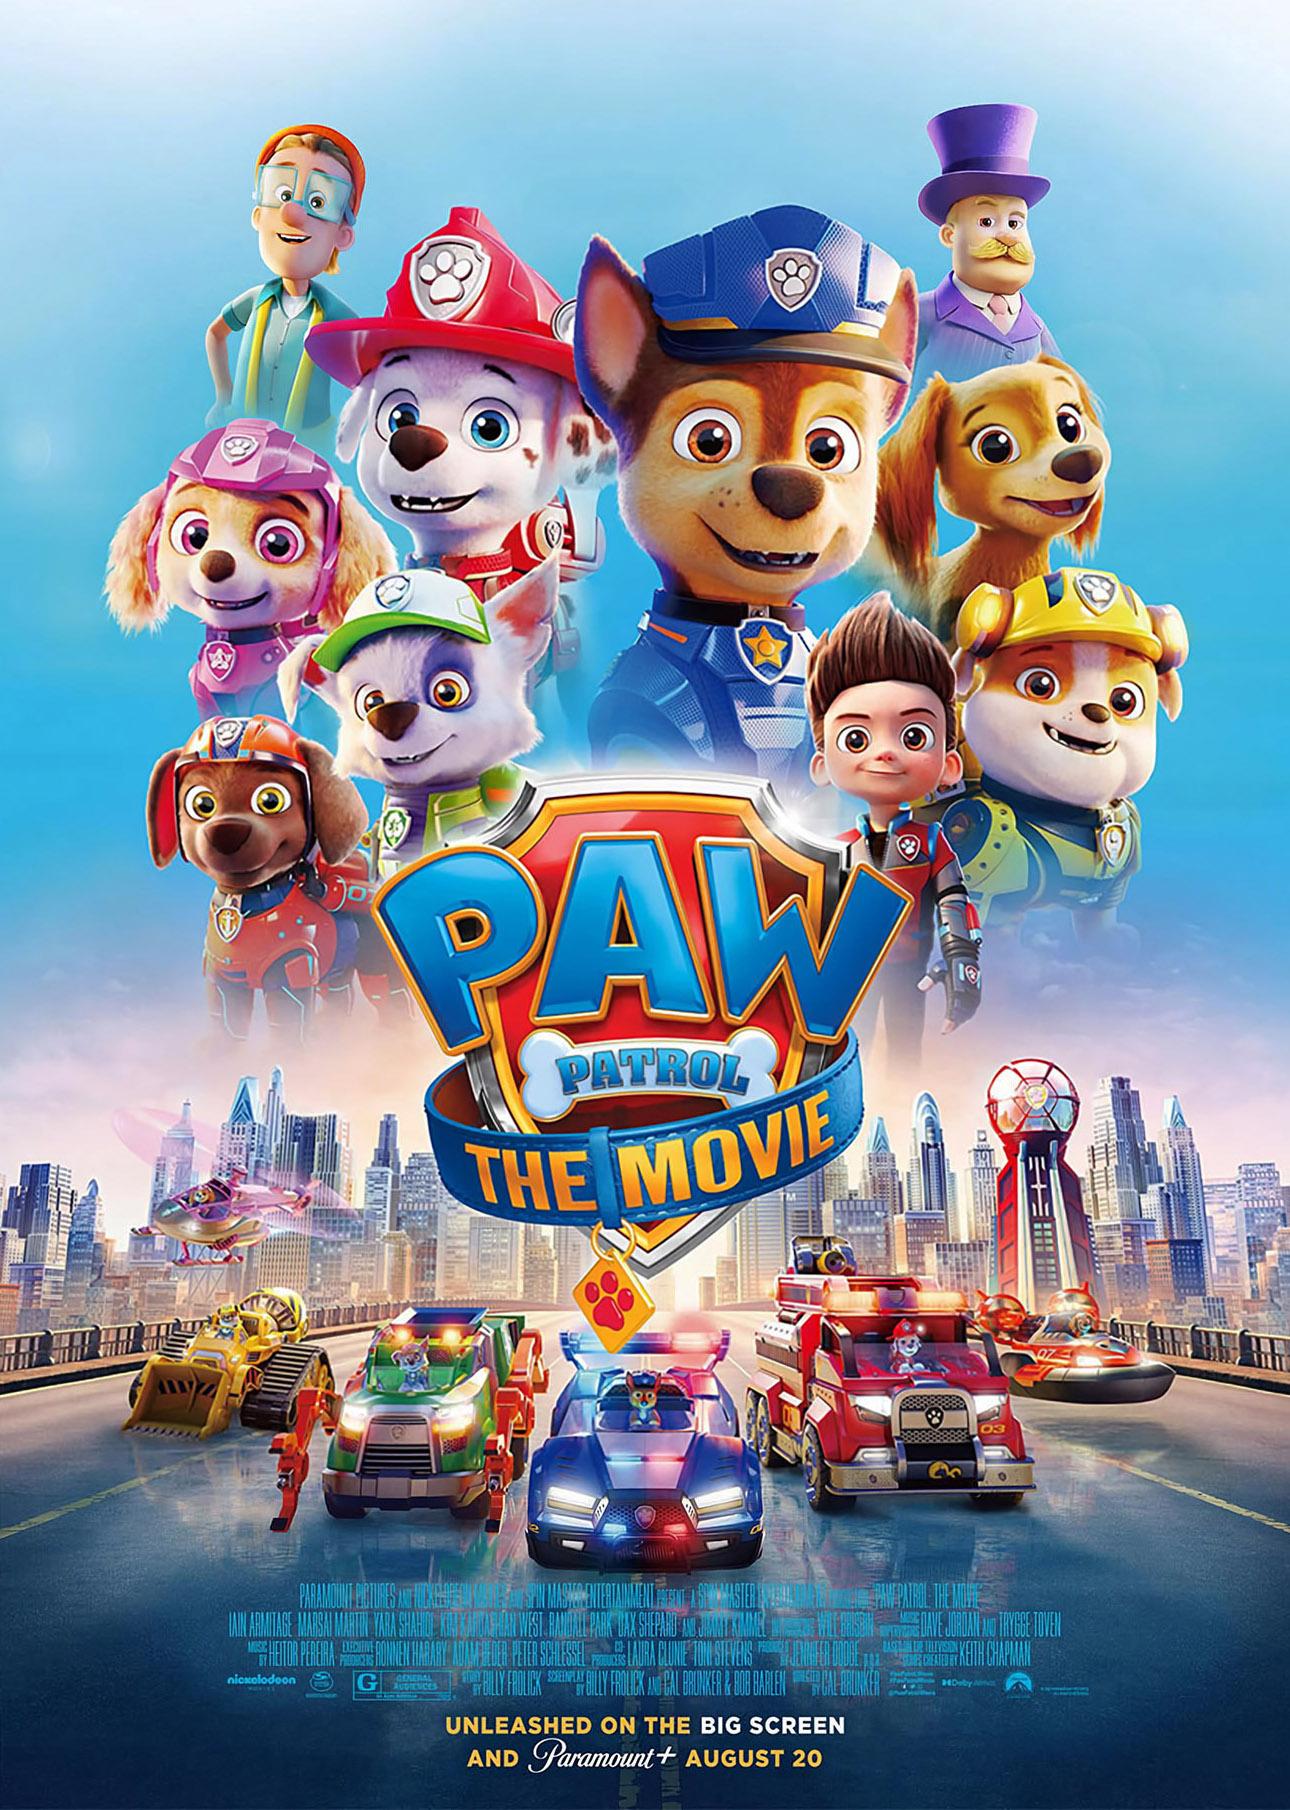 https://static.wikia.nocookie.net/nickelodeon/images/1/12/PAW-Patrol-The-Movie-poster.jpg/revision/latest?cb=20230802143854